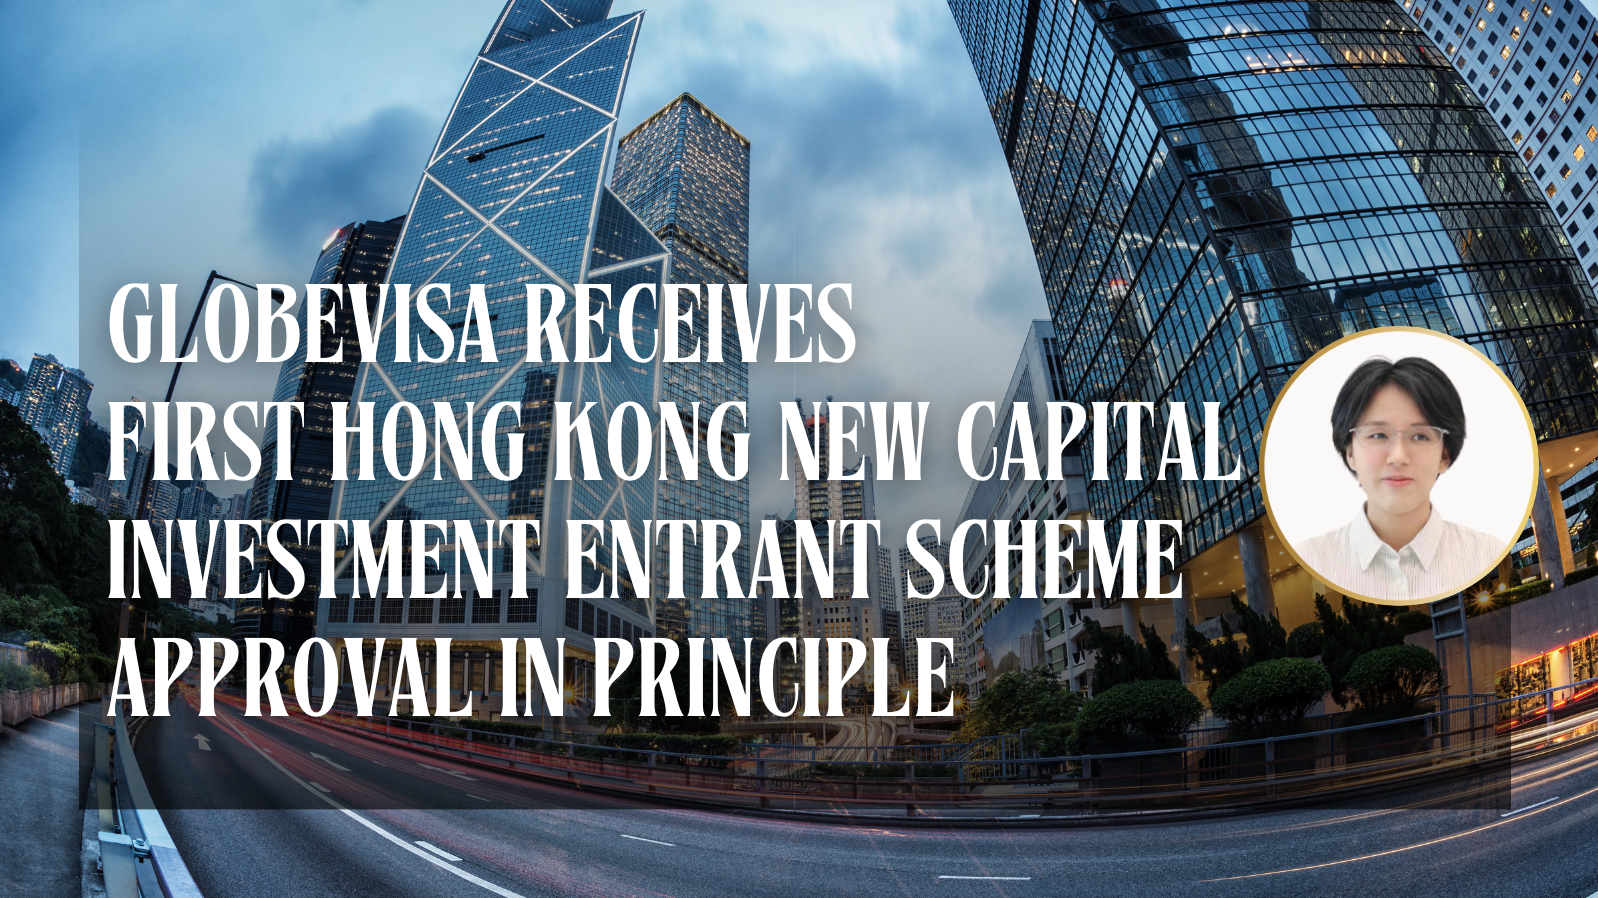 Globevisa Receives First Hong Kong new Capital Investment Entrant Scheme Approval in Principle